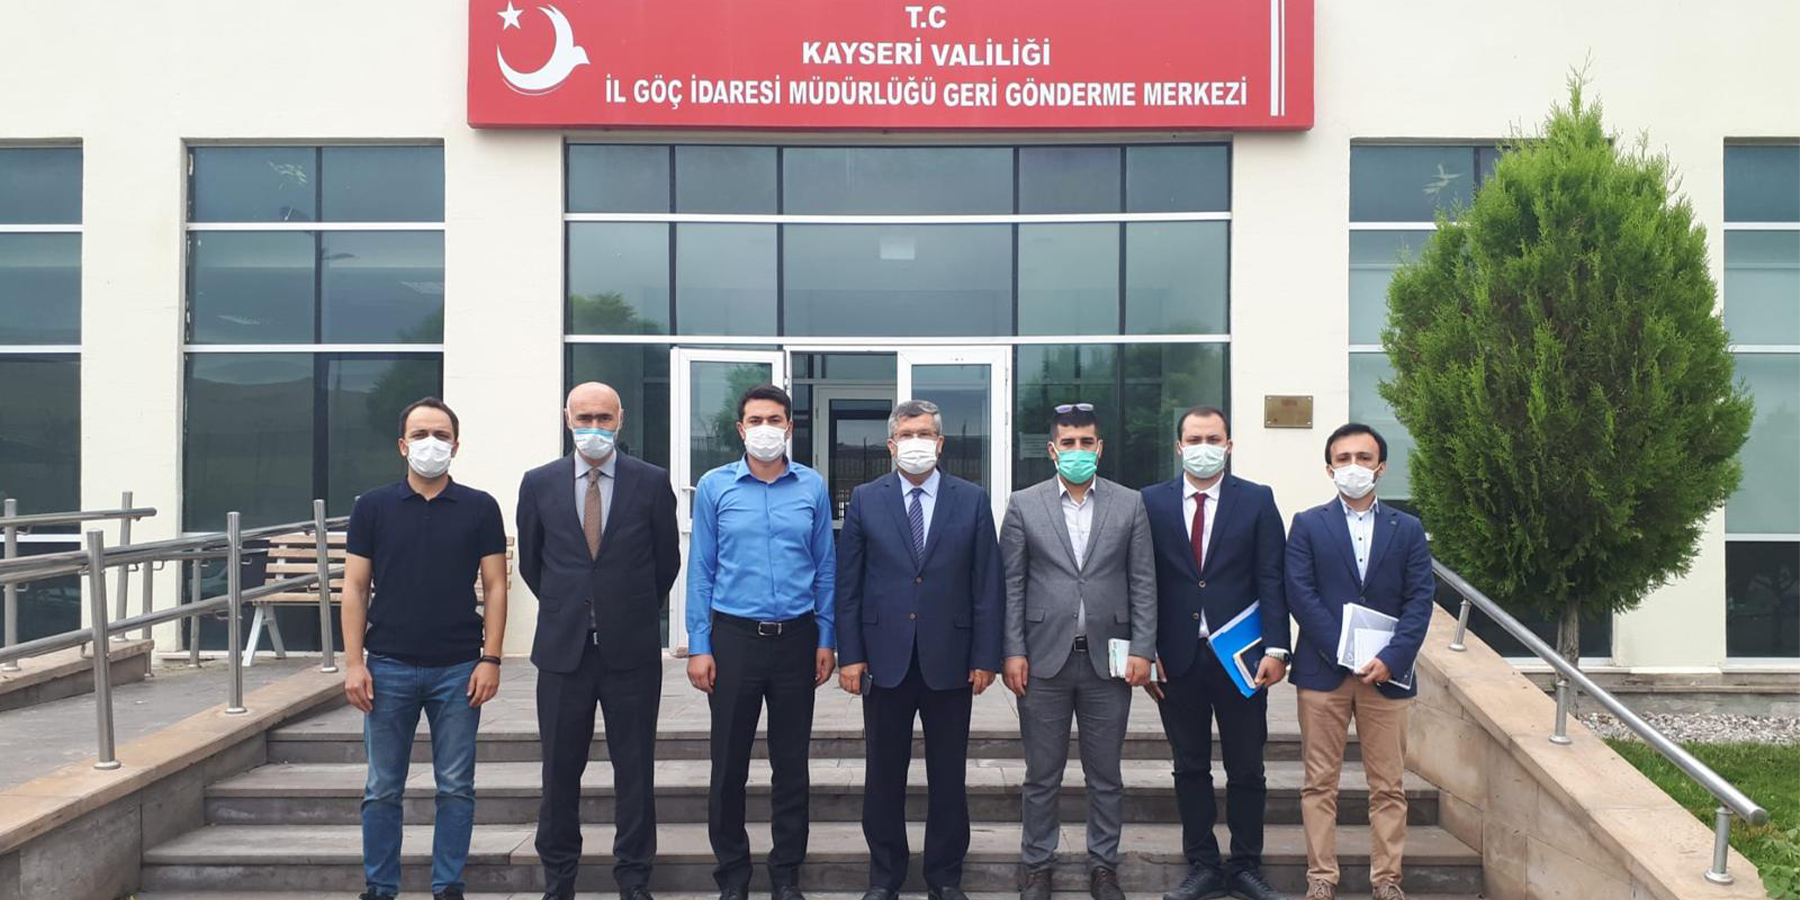 Follow-Up Visits Were Held in Kayseri As Part of The National Prevention Mechanism Mandate